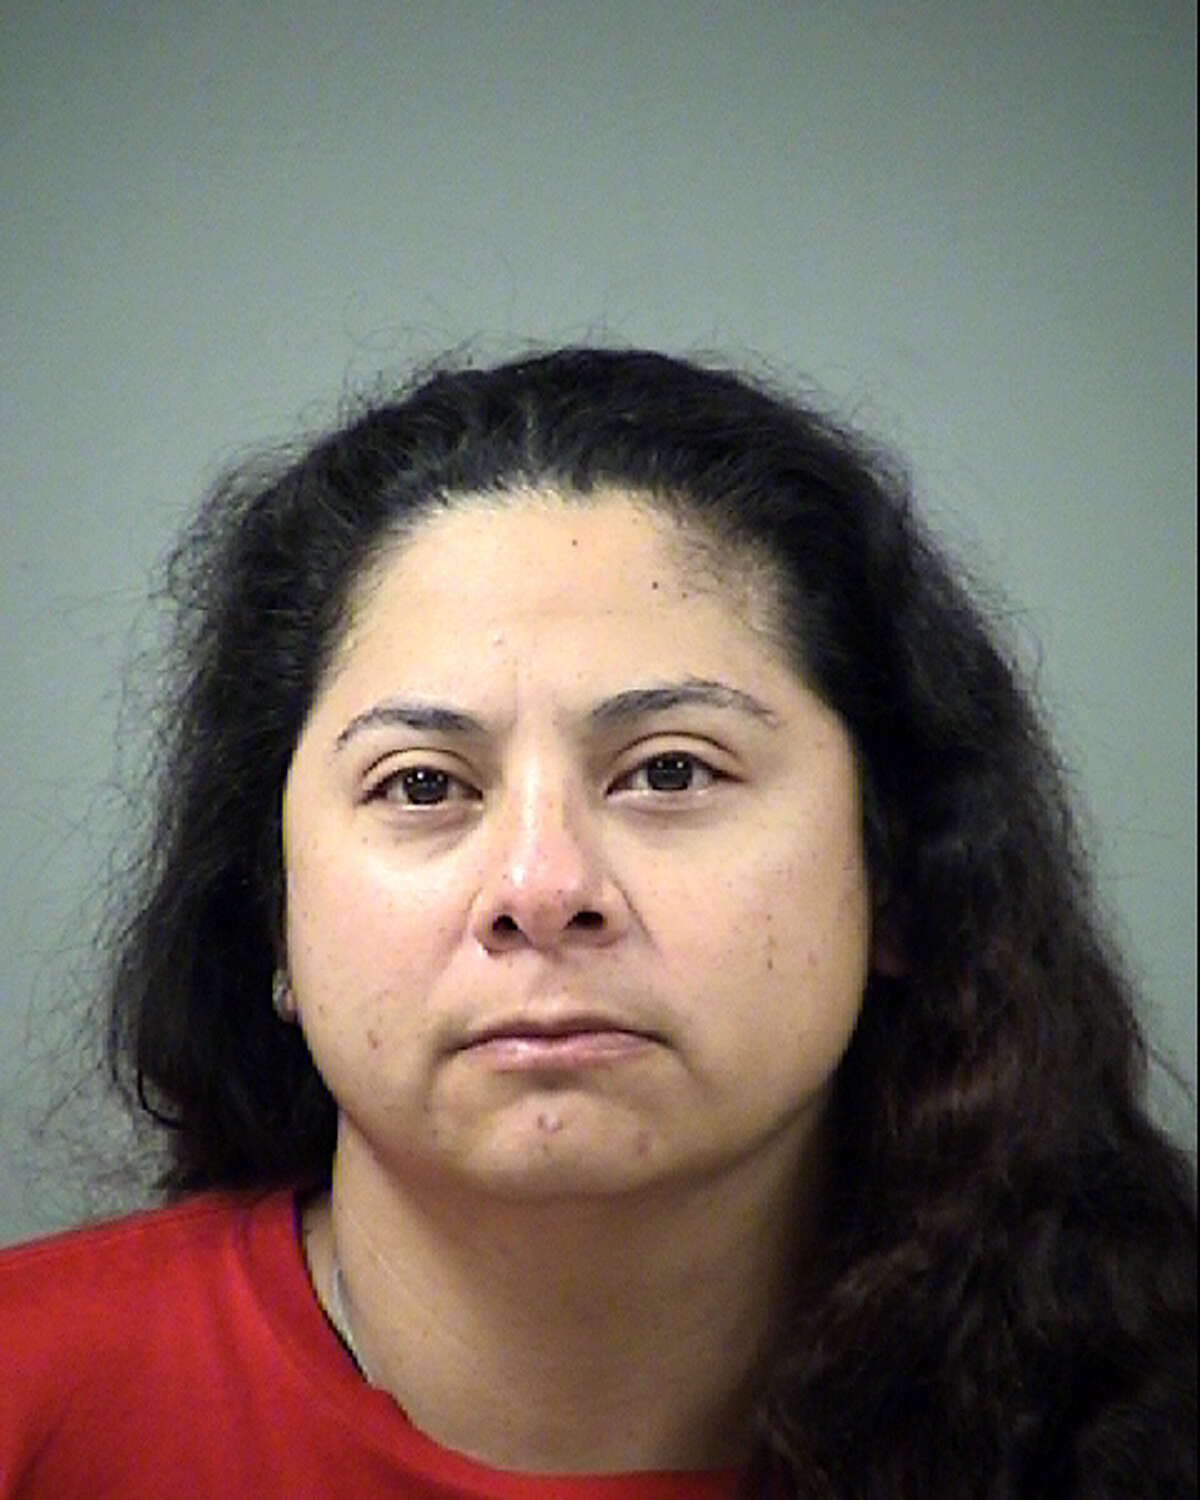 Tabita Sandoval Guerrero, 41, now faces a charge of domestic assault causing bodily injury. She was booked into the Bexar County Jail on a $3,500 bond. She bailed out of jail Tuesday morning.